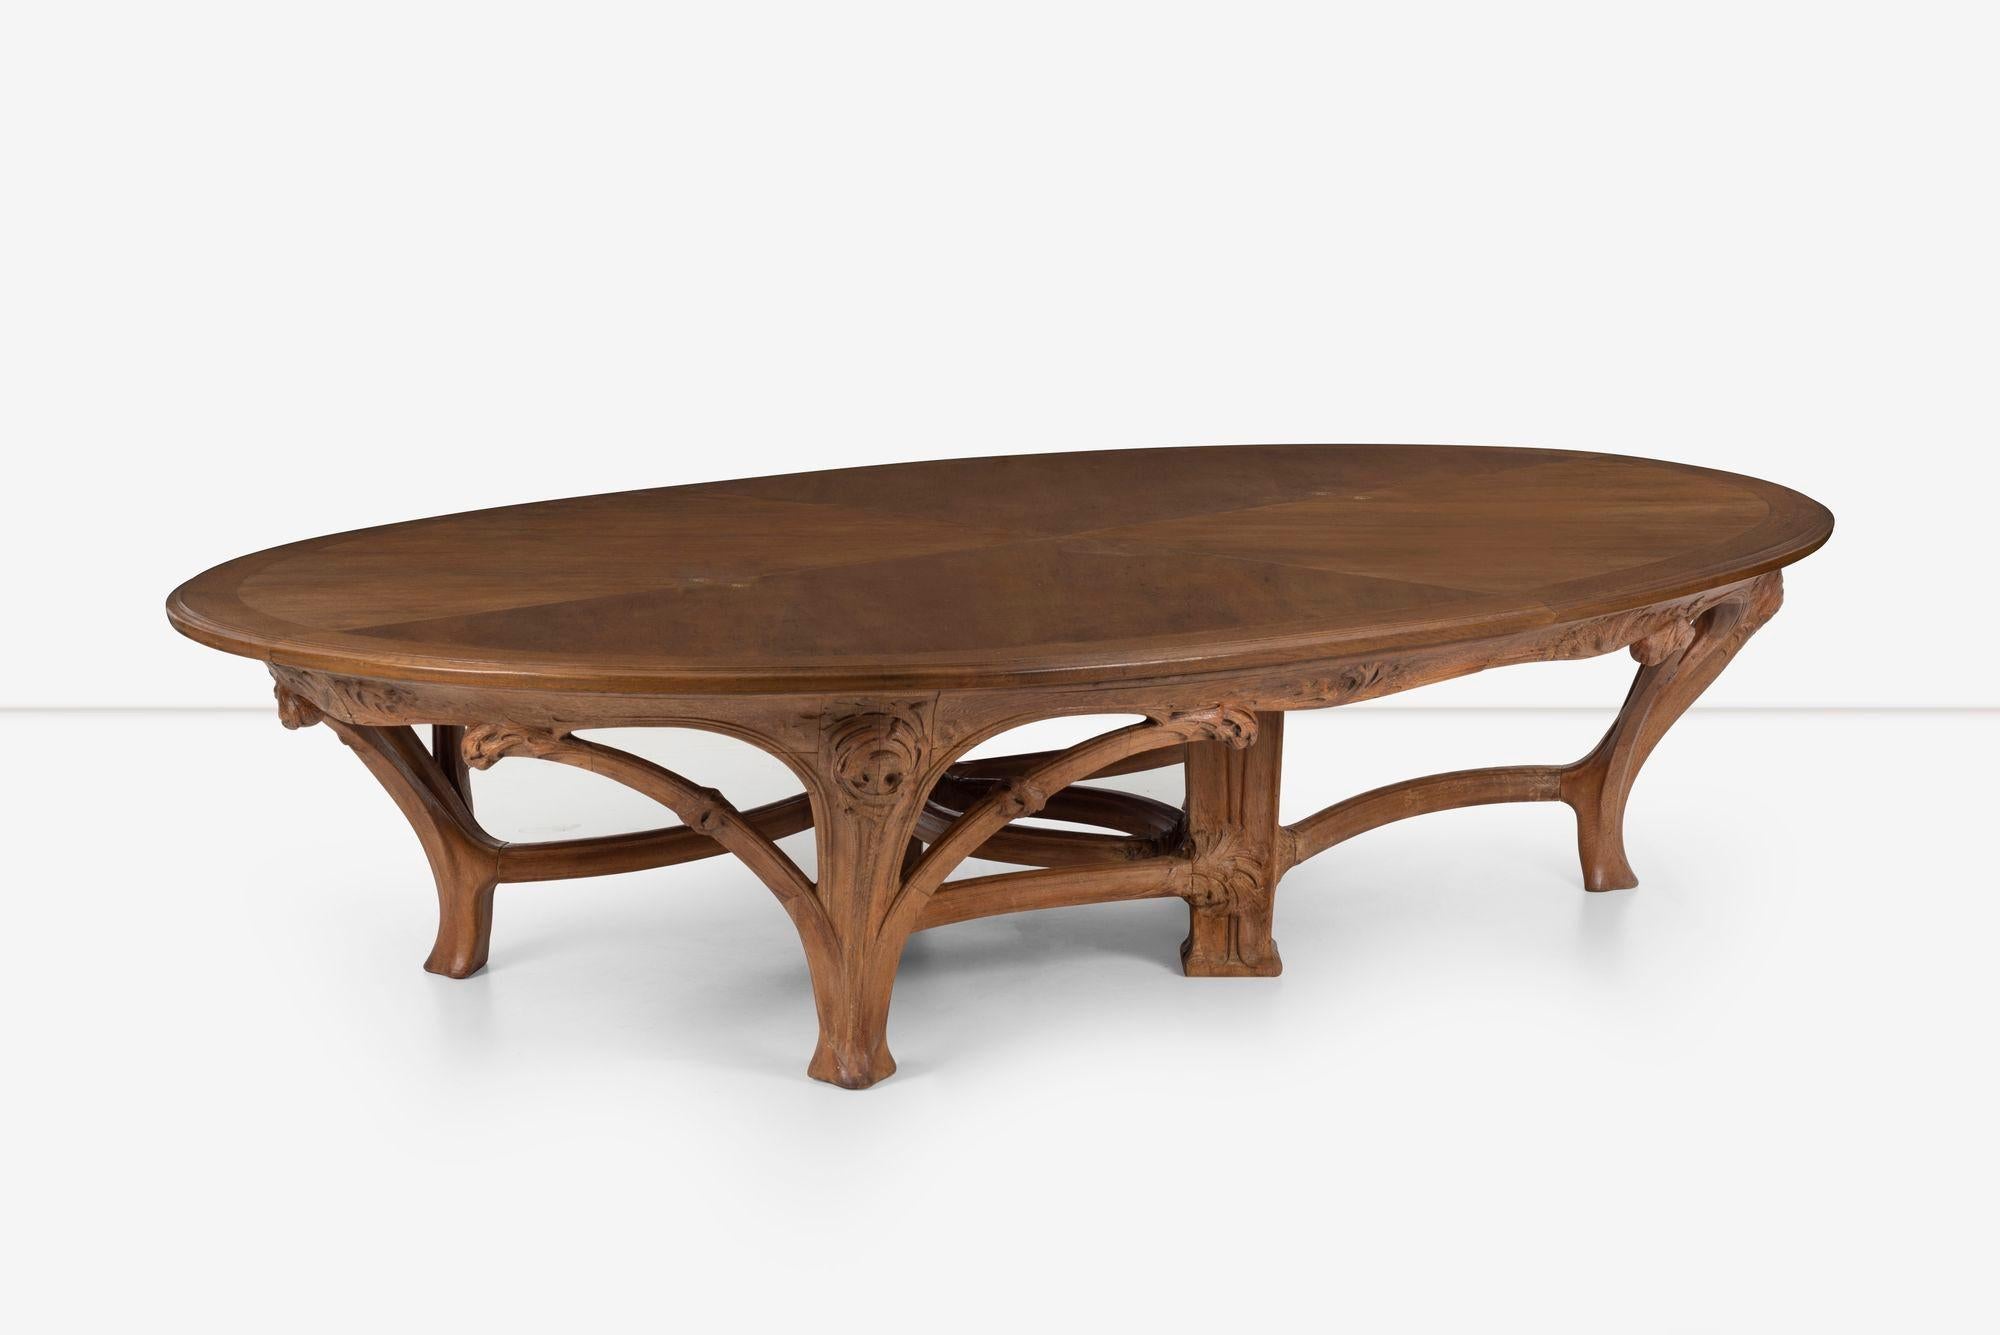 Hand-Carved Monumental Art Nouveau Dining Table Attributed to Victor Horta from the Firehous For Sale